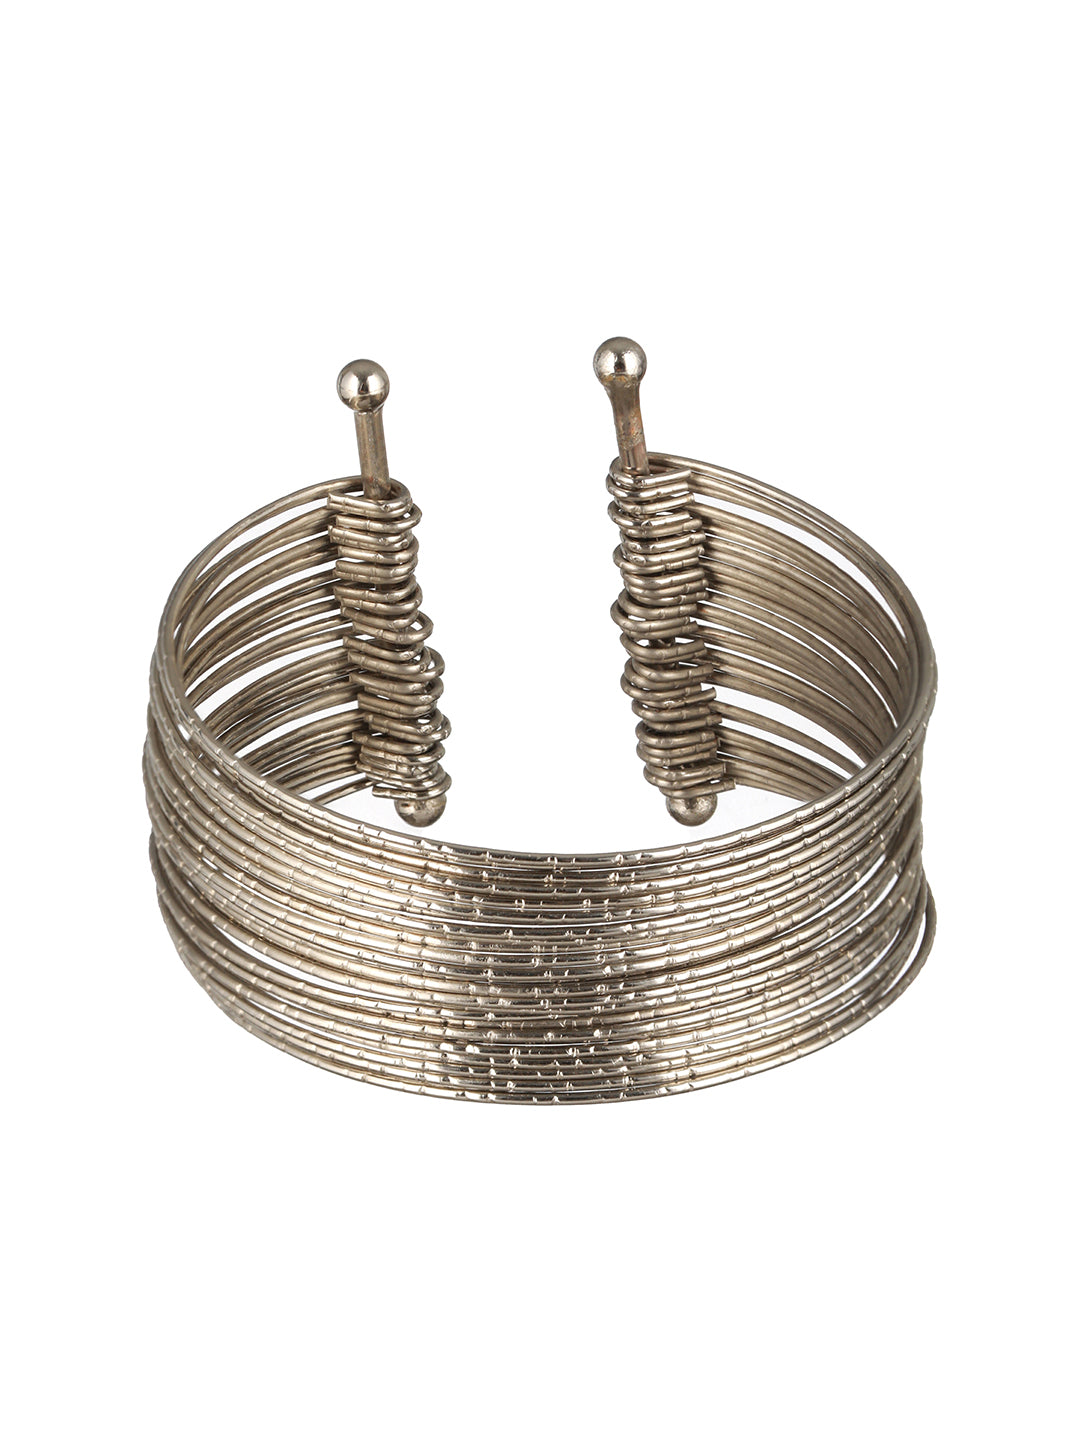 Priyaasi Multistring Textured Solid Silver-Plated Cuff Bracelet